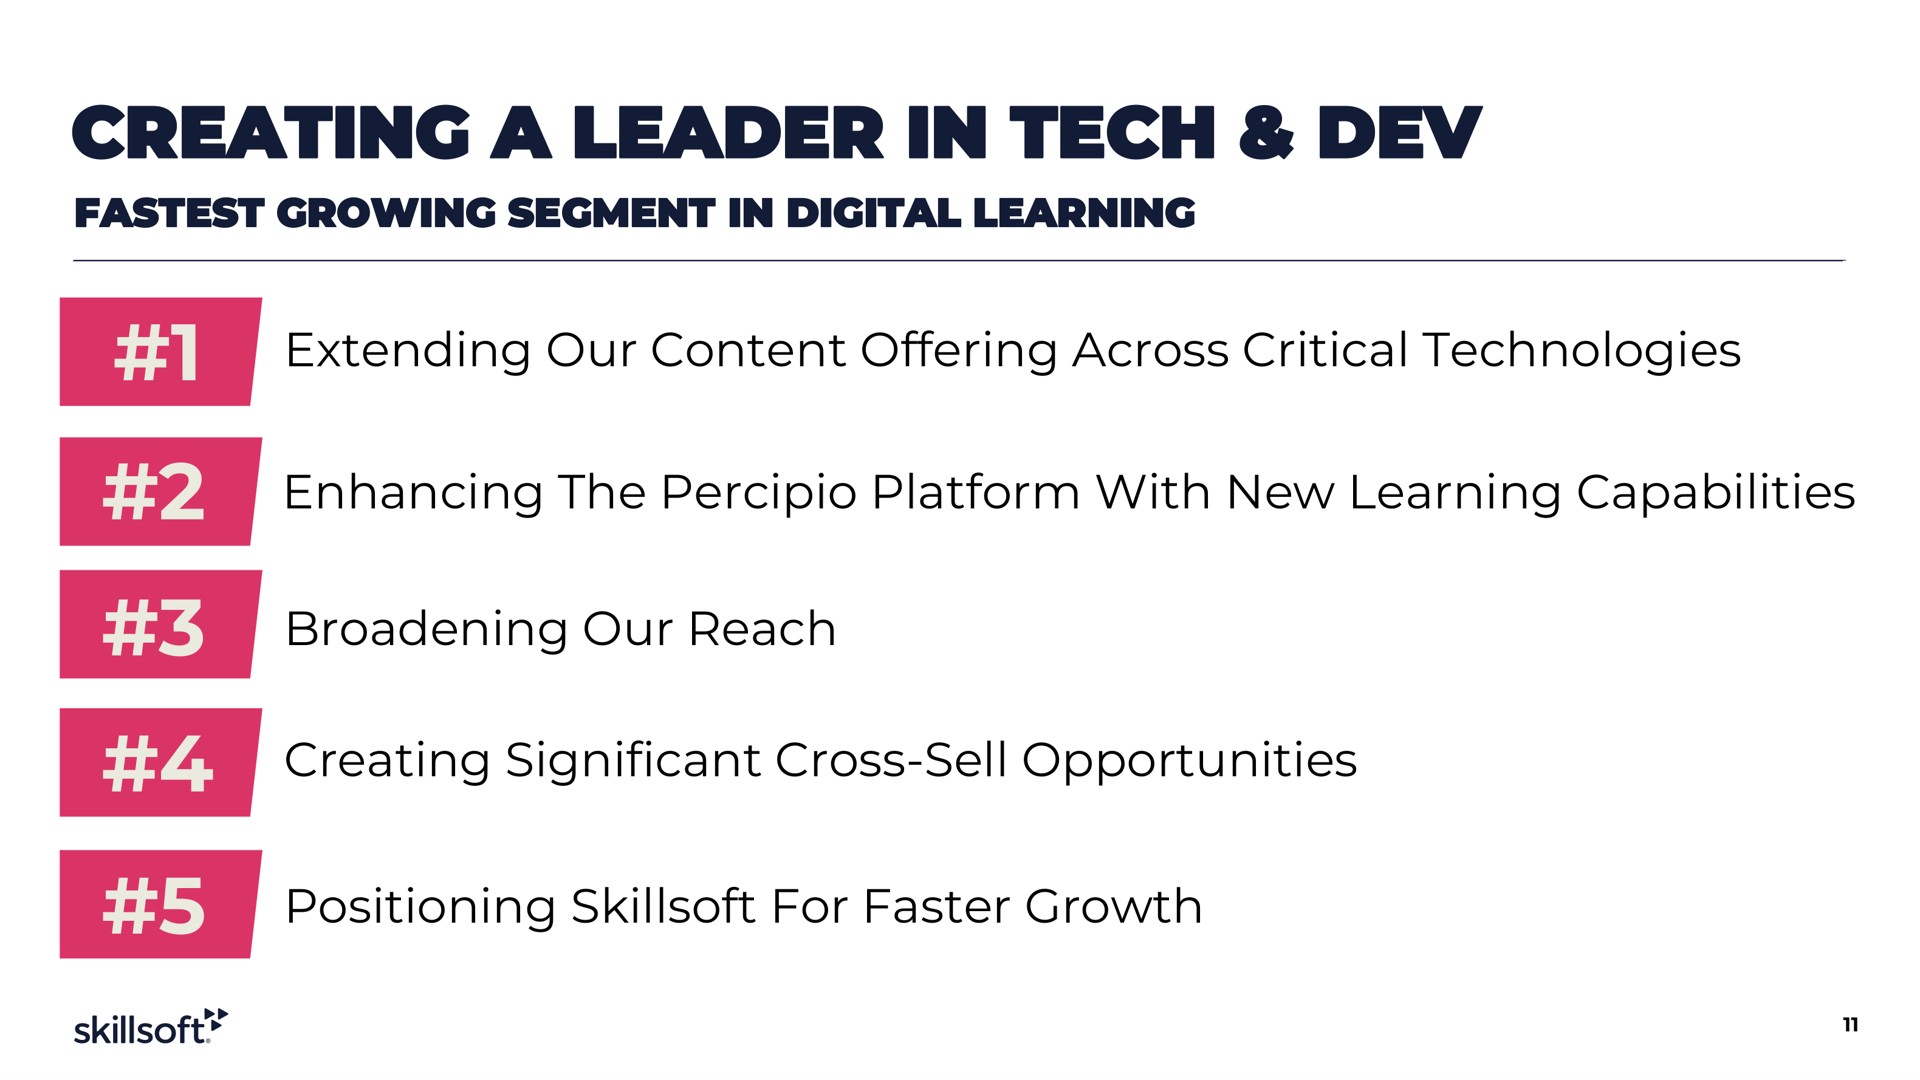 creating a leader in tech dev saw significant cross sell opportunities | Skillsoft